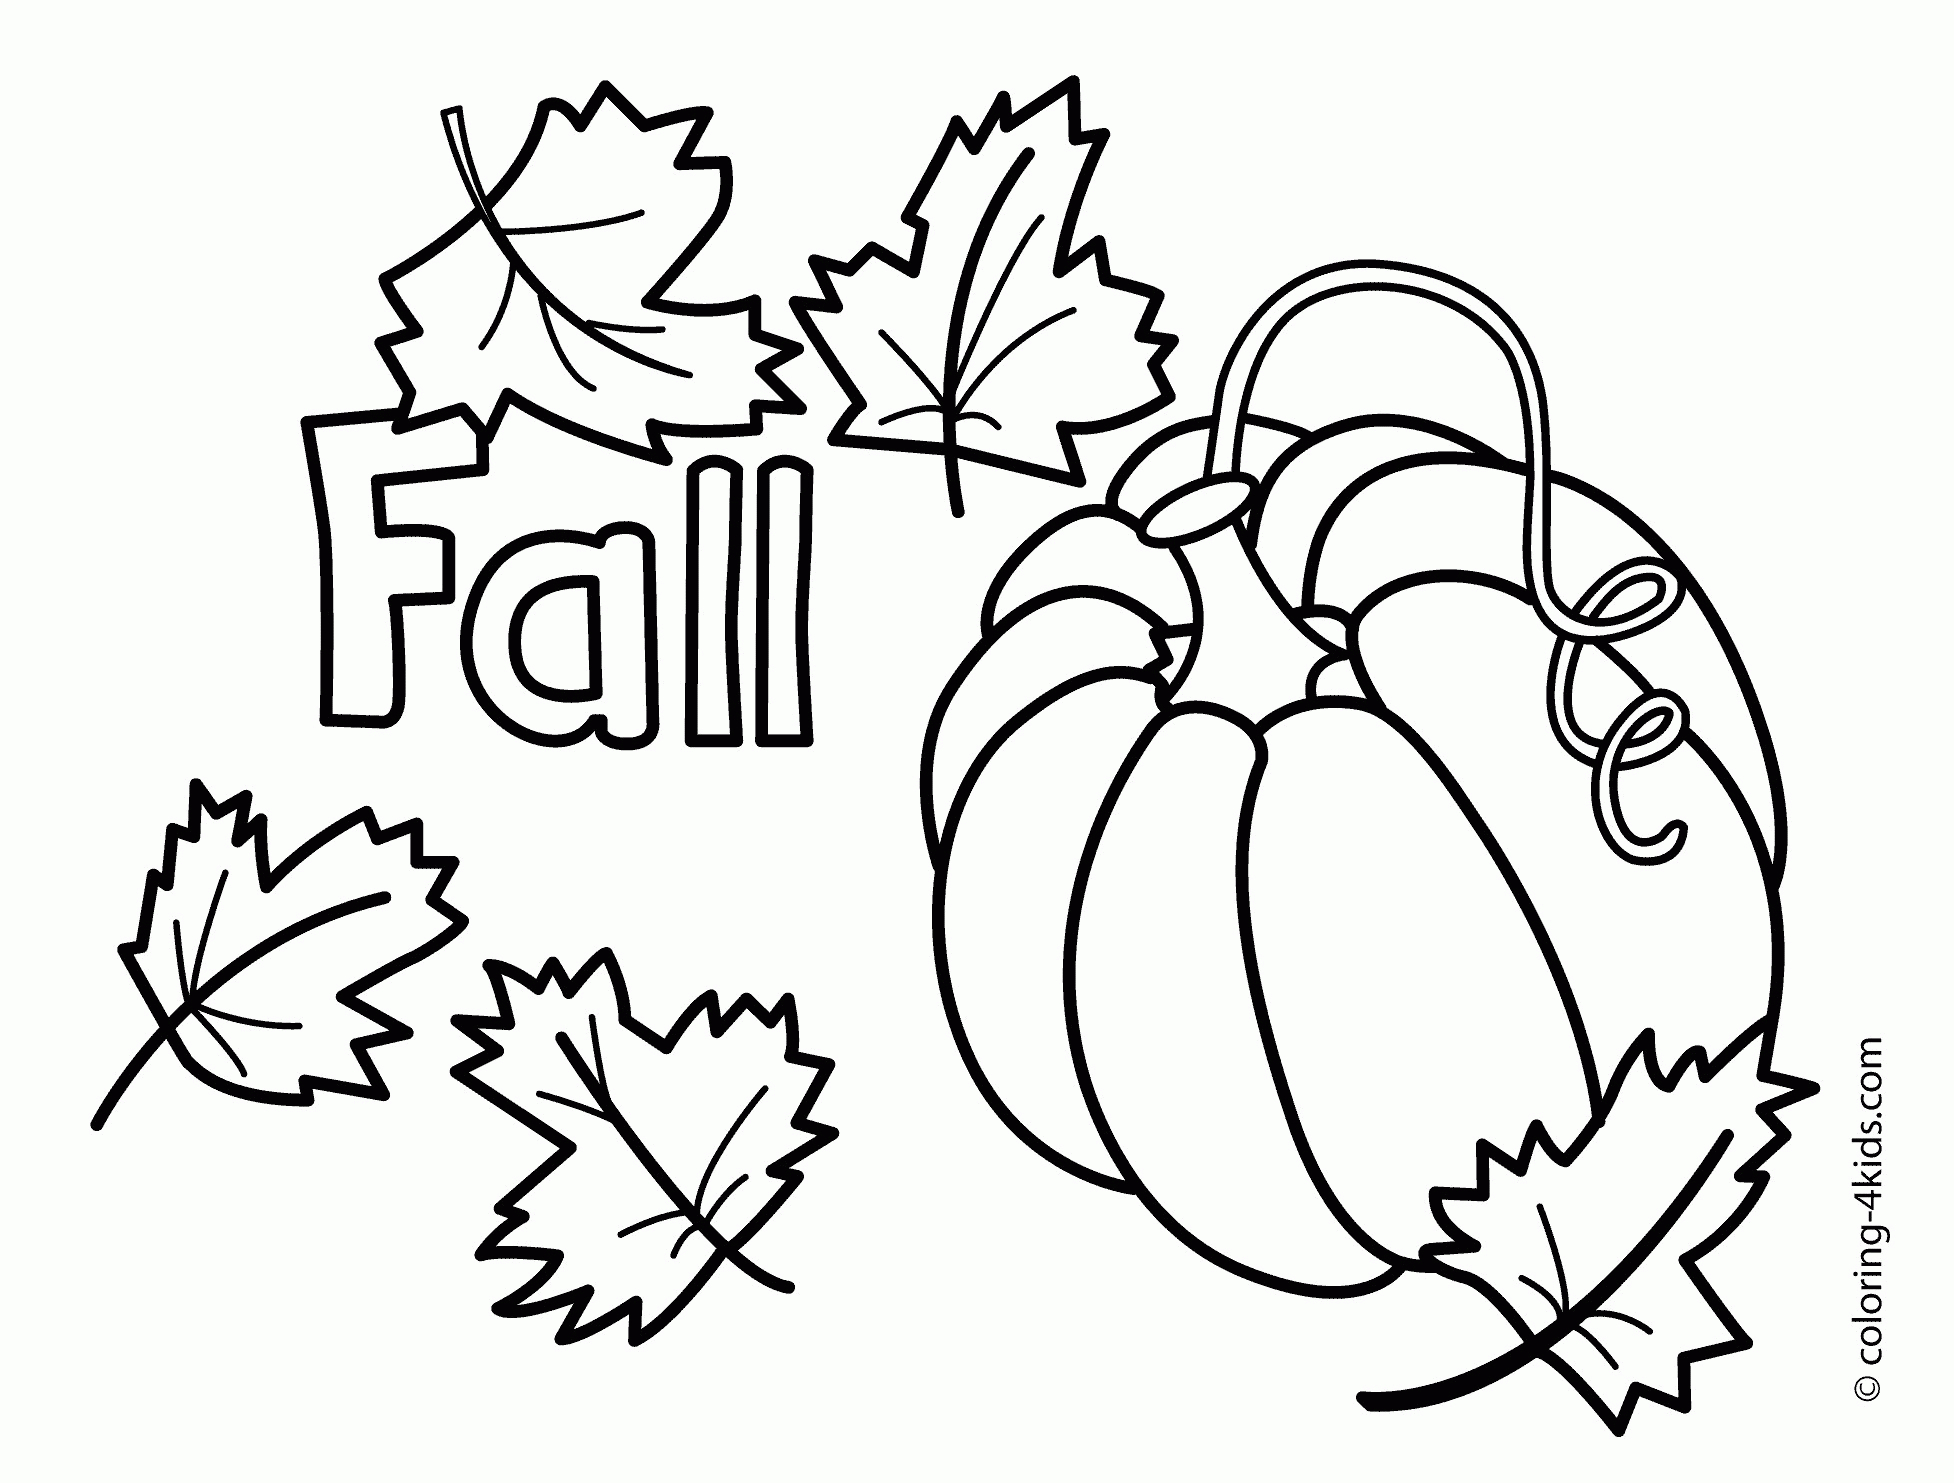 Coloring Pages : Stunning Fall Coloringes Printable Photo Ideas Part - Free Printable Coloring Pages Fall Season